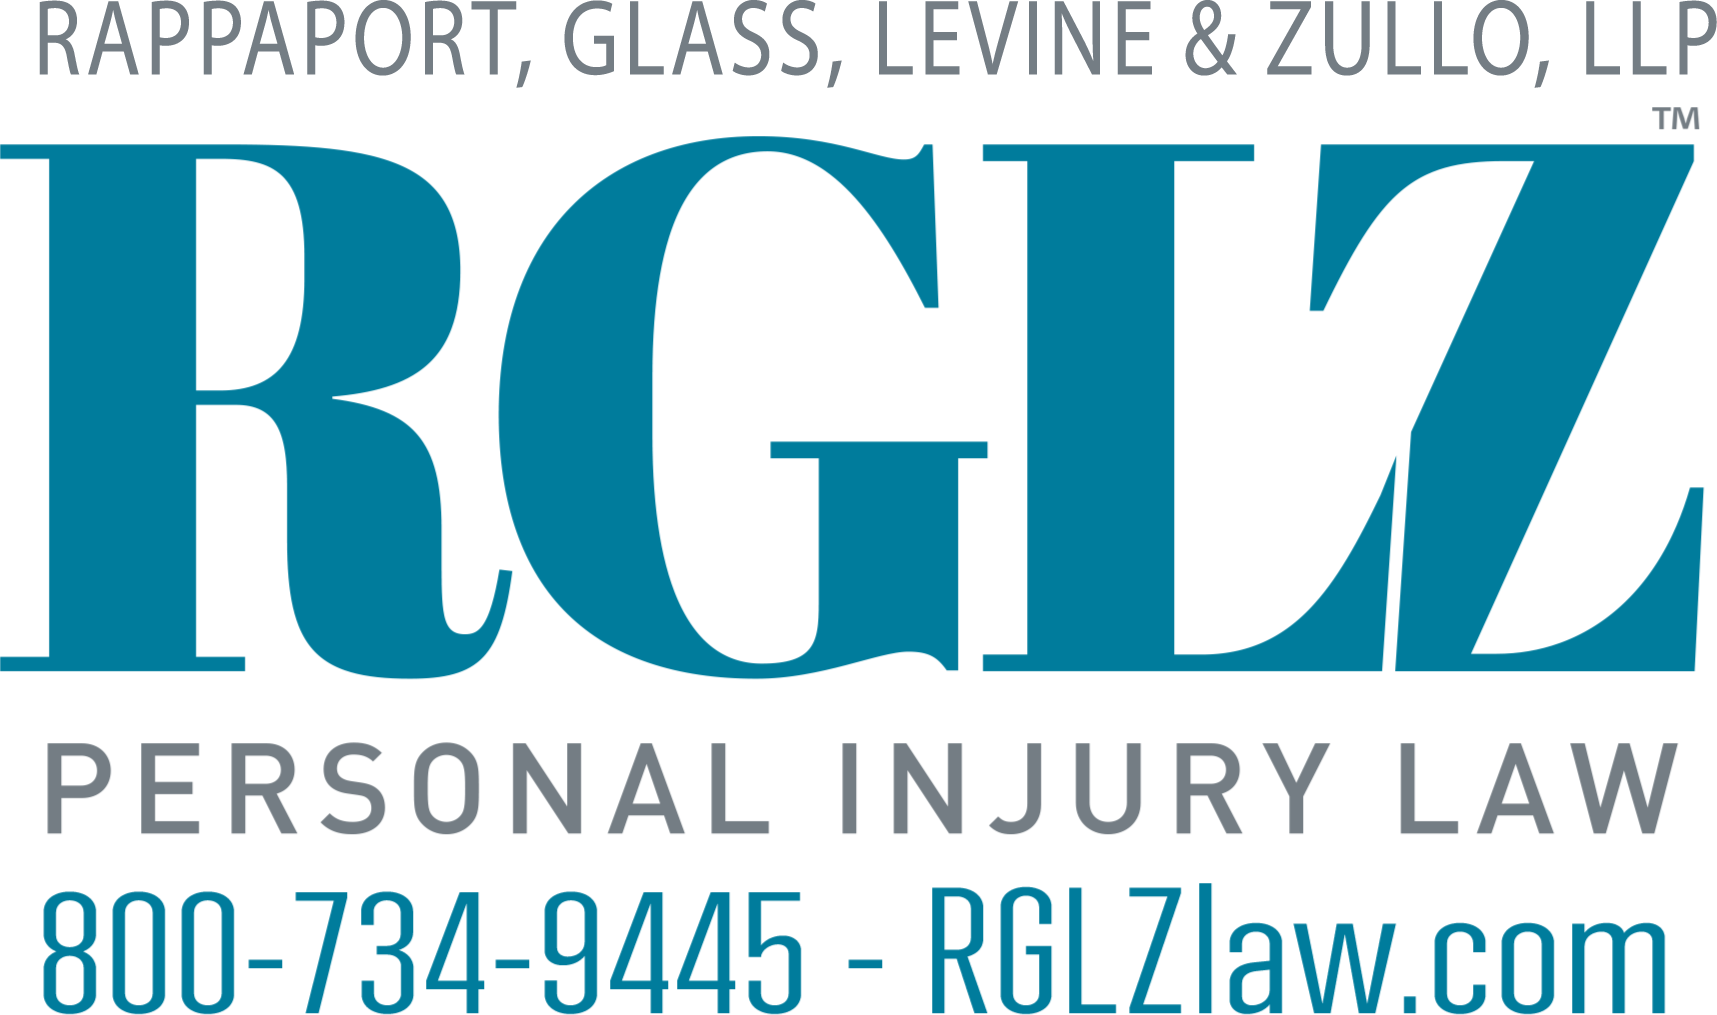 rglz LOGO phone and web.png